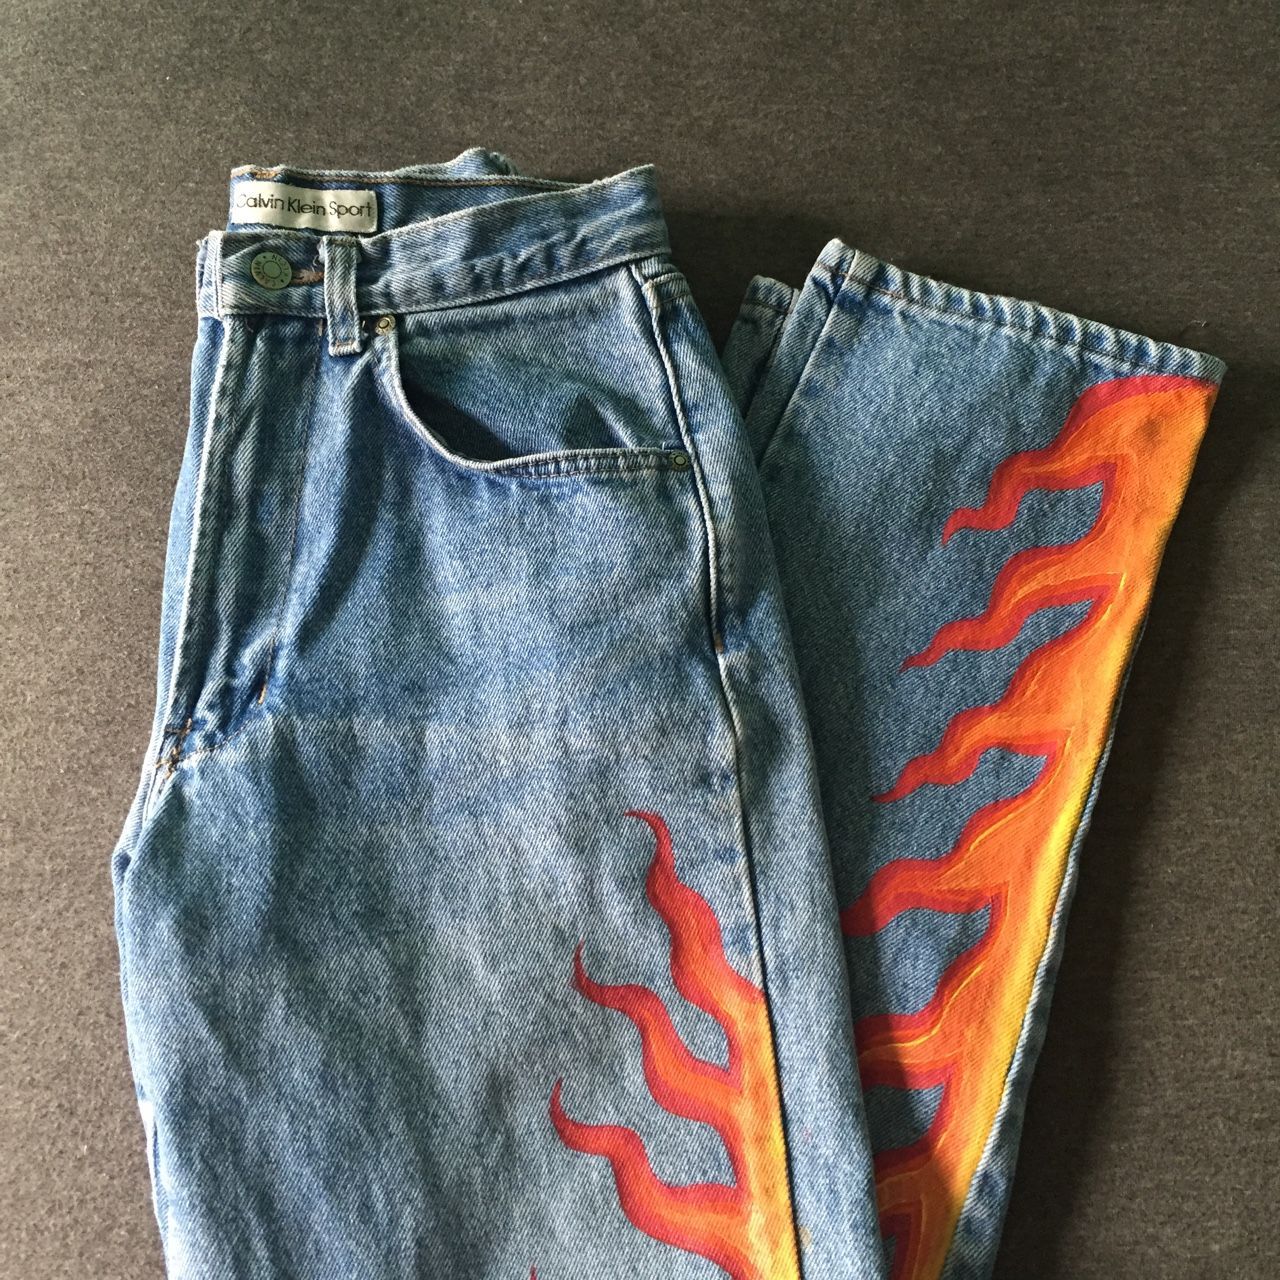 ??ON HOLD?? Vintage hand-painted Calvin Kleins???... - Depop - ??ON HOLD?? Vintage hand-painted Calvin Kleins???... - Depop -   9 diy Clothes grunge ideas